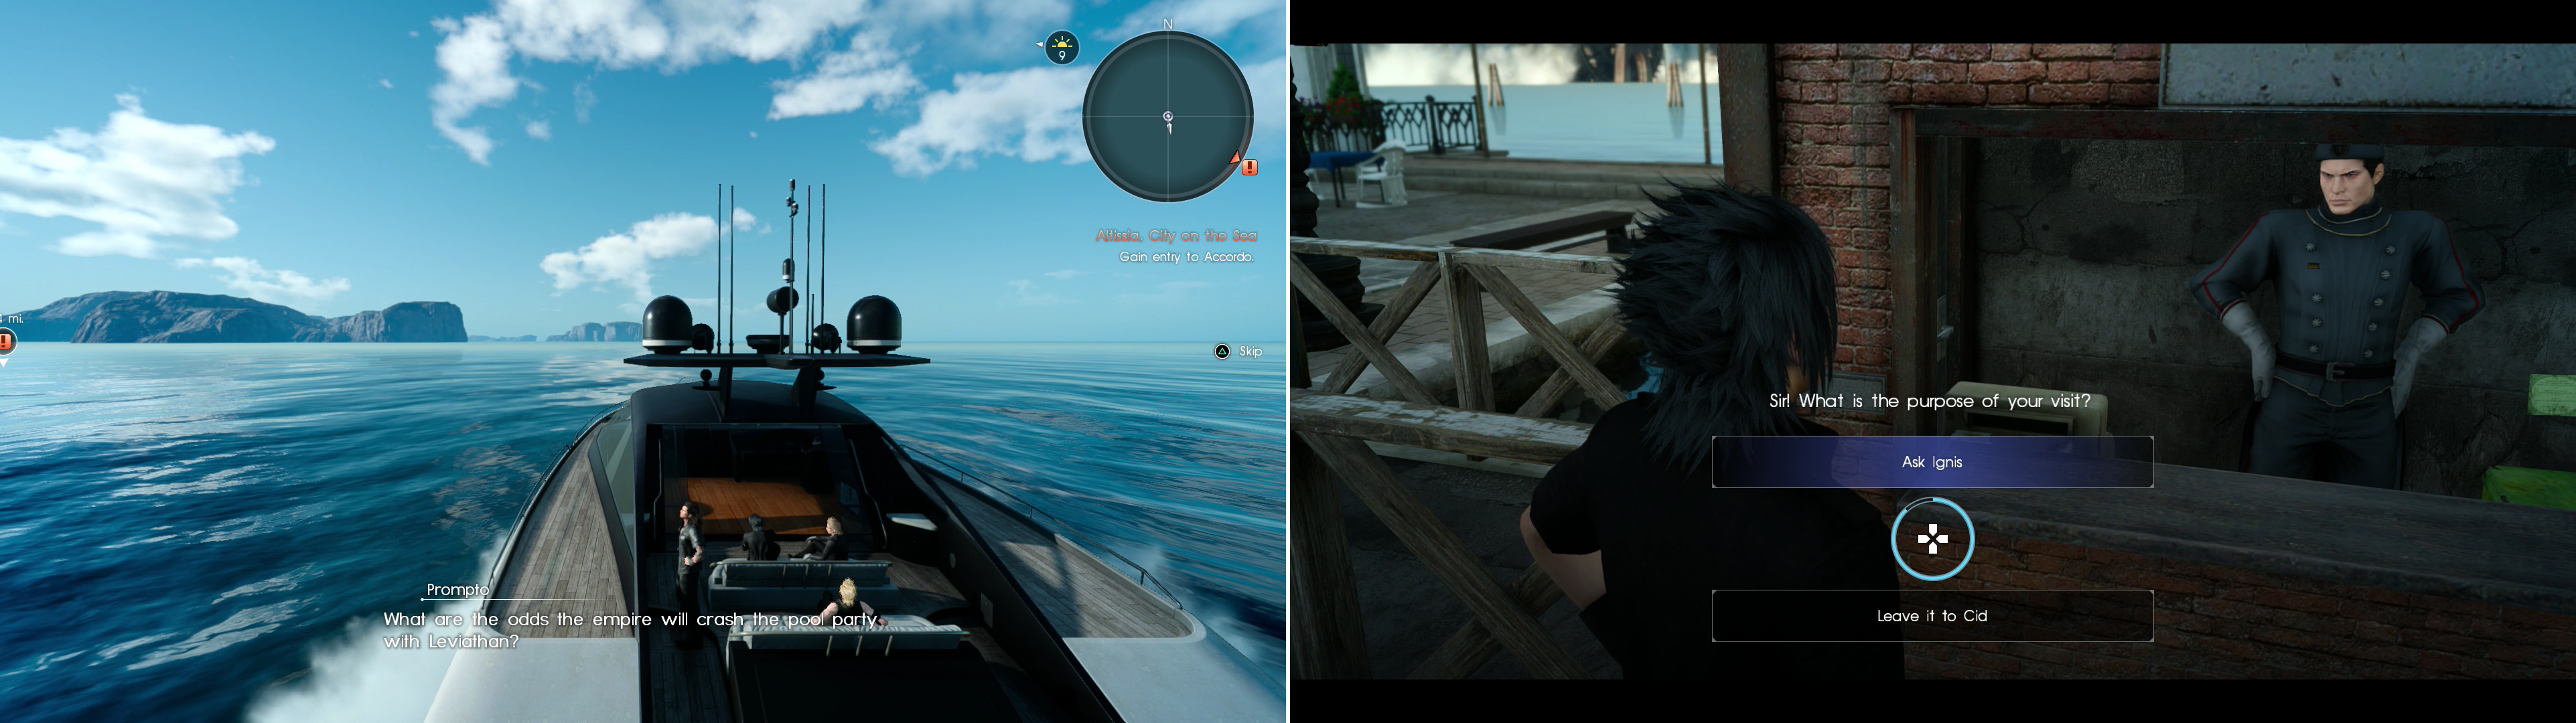 The party will discuss politics as they sail to Altissia (left). Make sure you lean on Ignis at the security checkpoint to avoid being robbed (right).